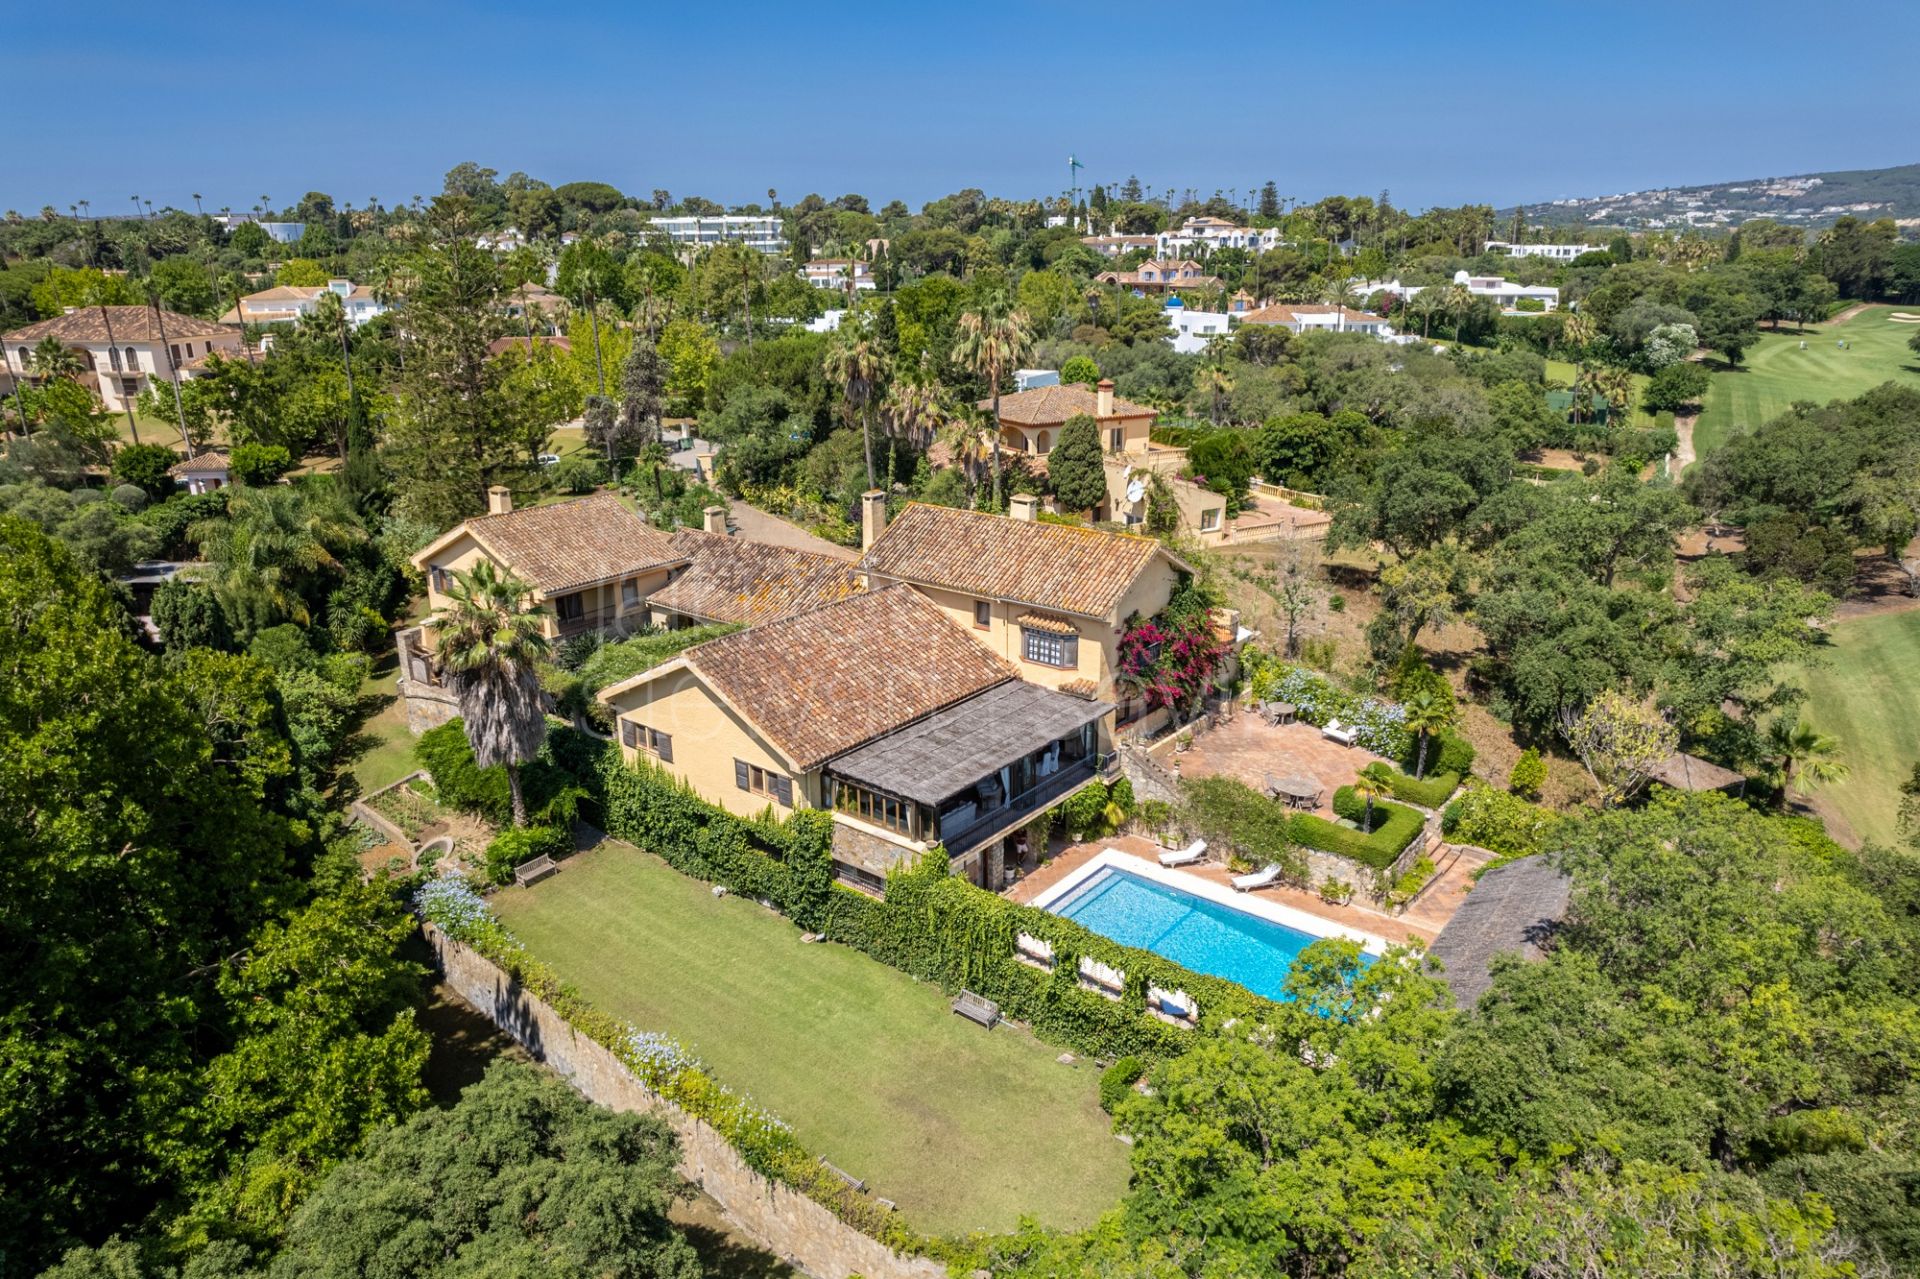 Unbeatable location frontline to Real Sotogrande Golf Course